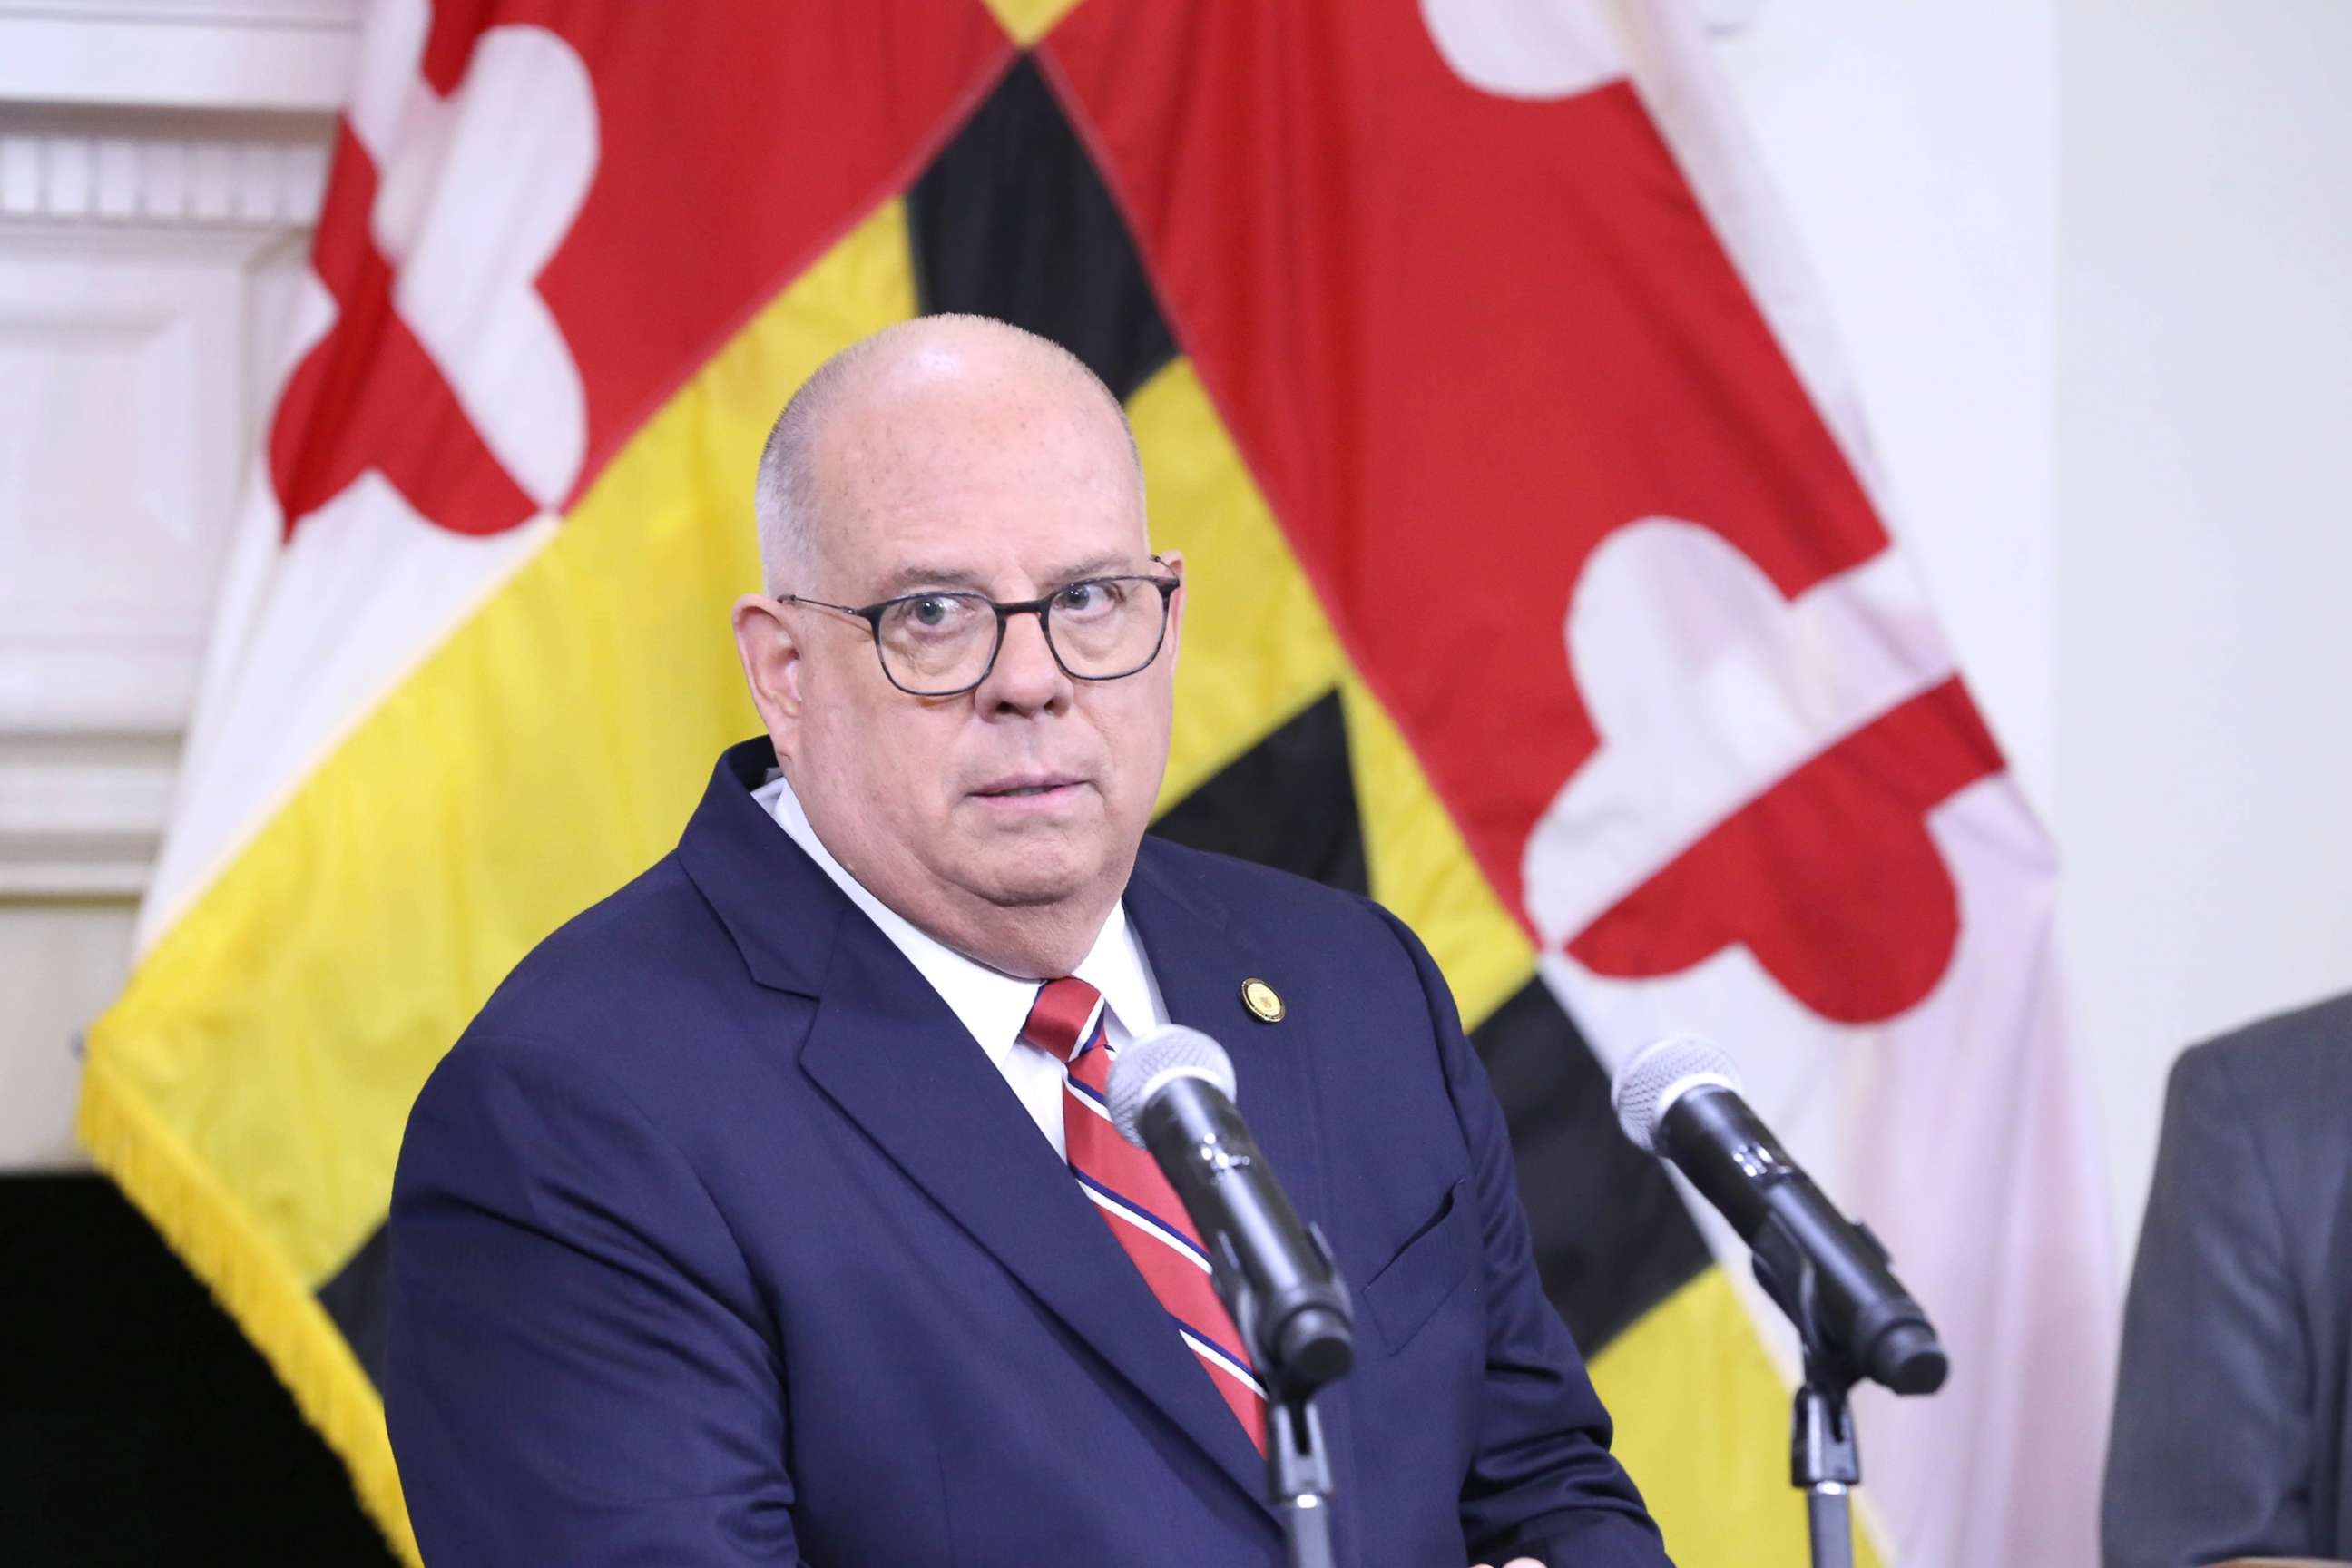 PHOTO: Governor Larry Hogan speaks at a press conference at Maryland State House on June 9, 2022 in Annapolis, Md.